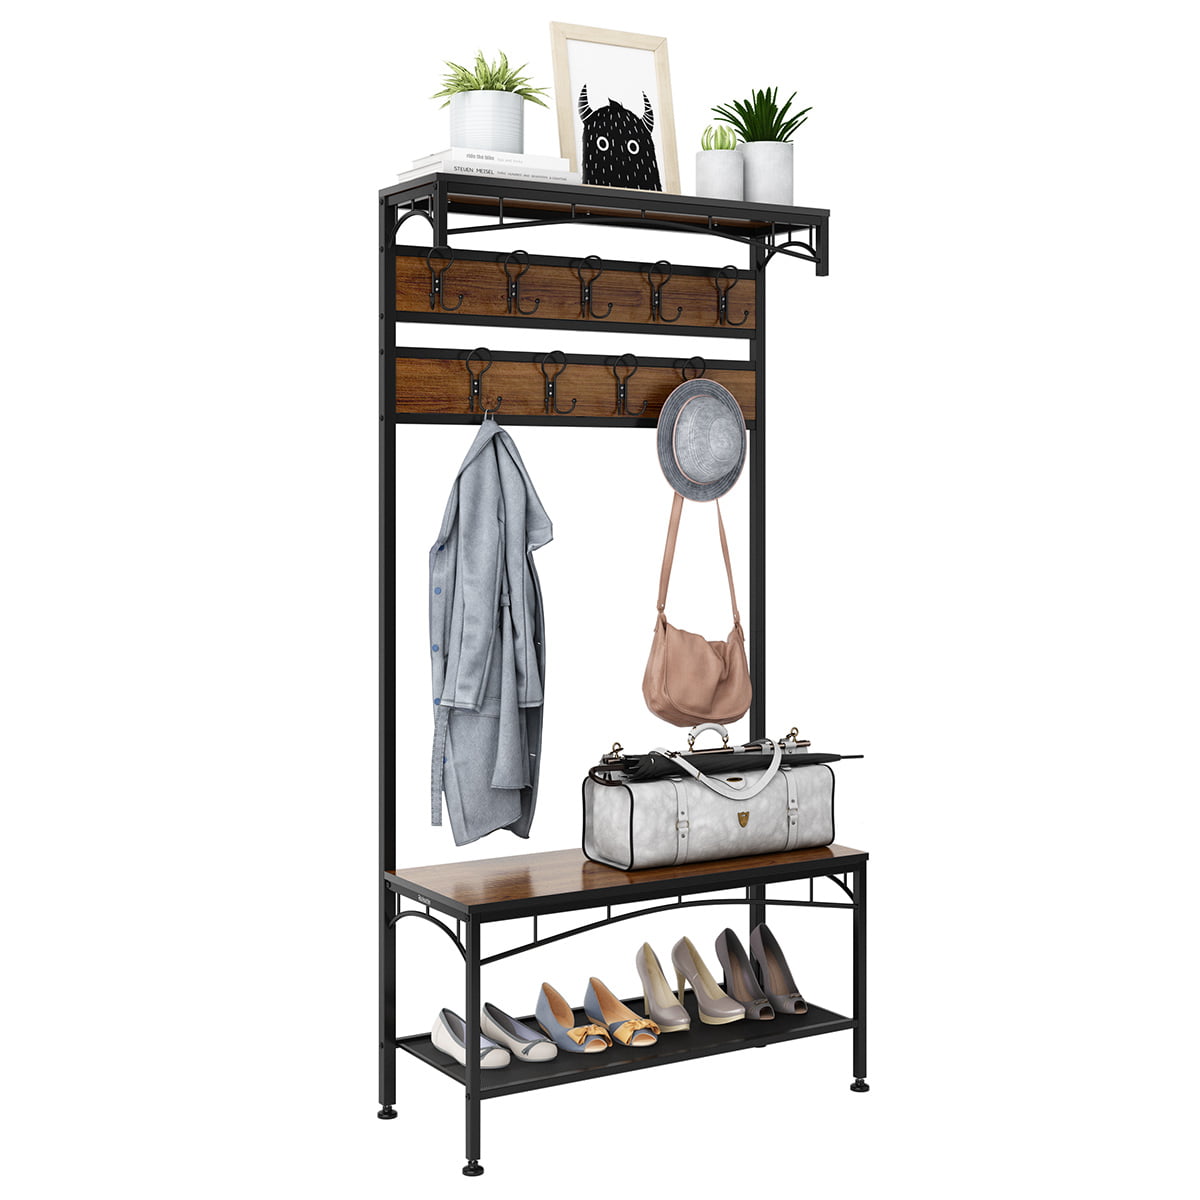 Black Freestanding Coat Rack Shoe Bench 3 in 1 Hall Tree Entryway Storage Shelf with 7 Hooks and Metal Frame 69 inches